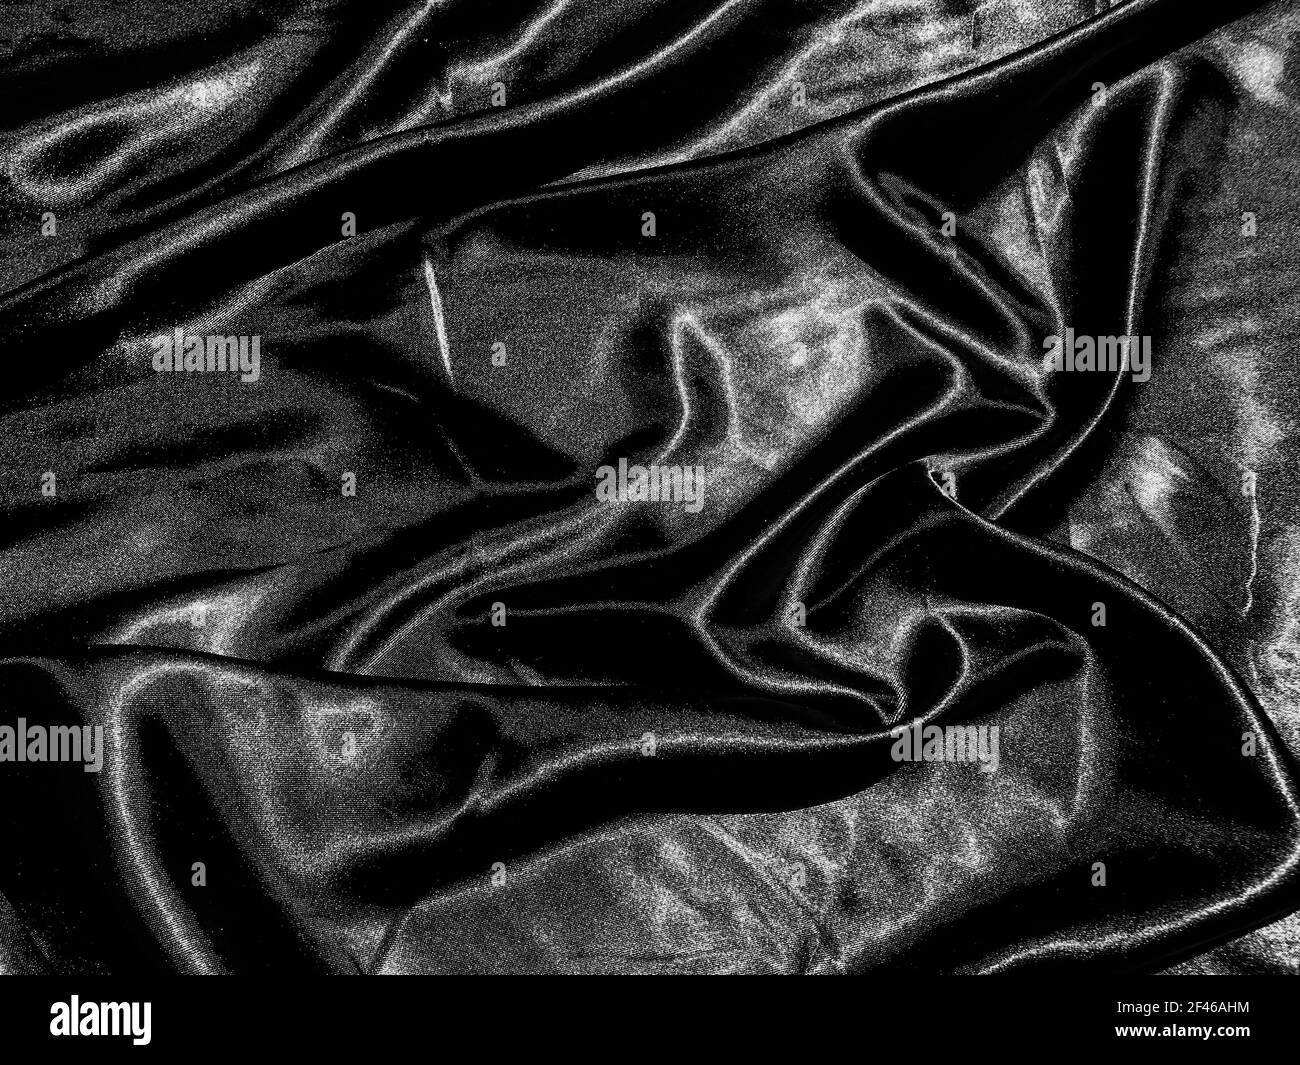 luxury black silk or satin texture background with liquid wave or wavy  folds. Wallpaper design Stock Photo - Alamy